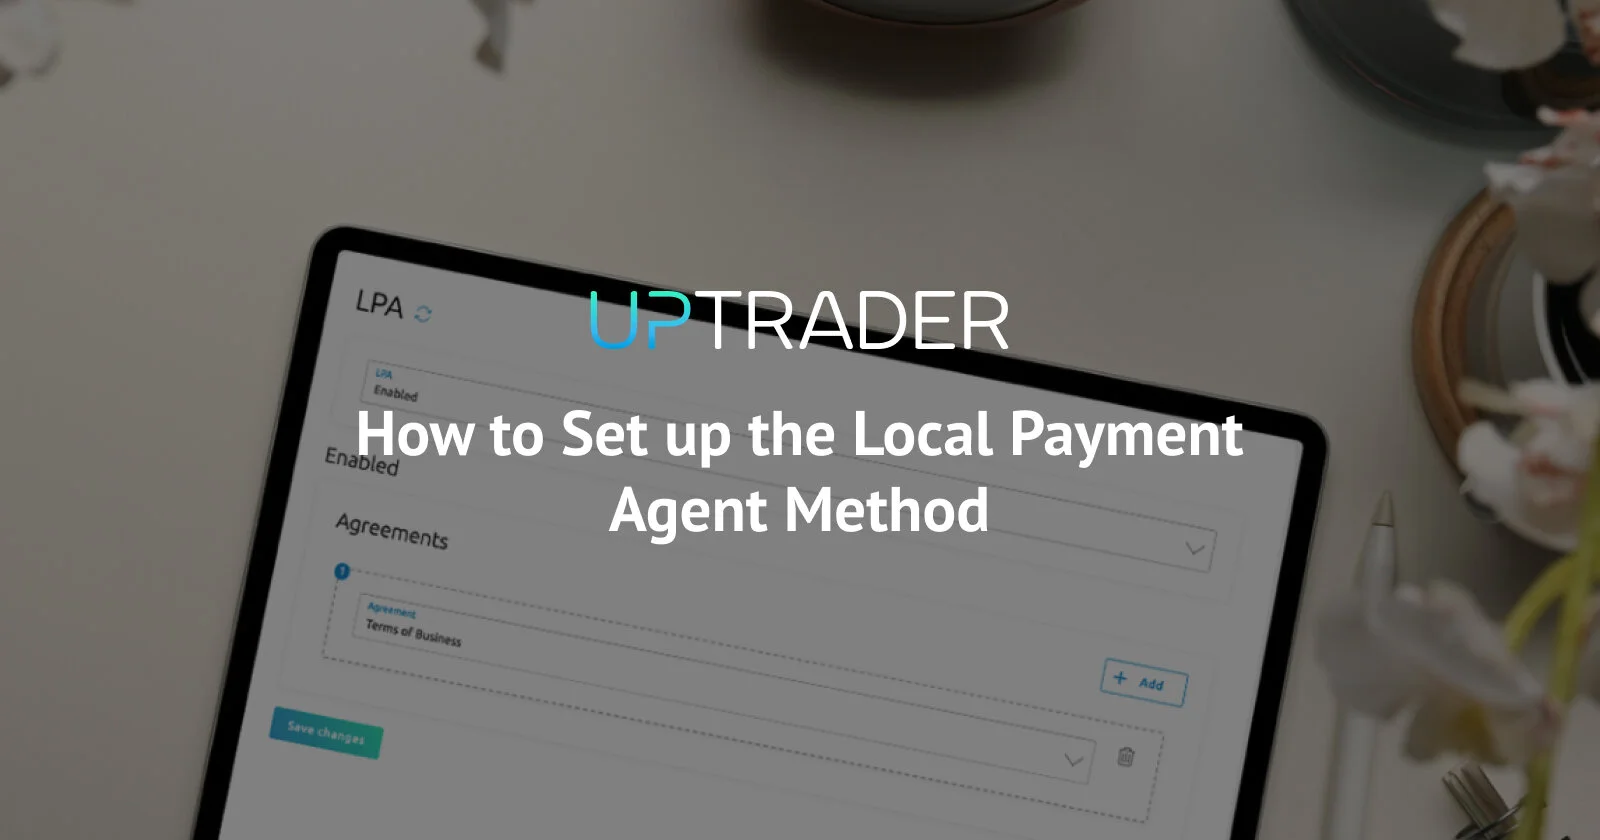 How to Set up the Local Payment Agent Method